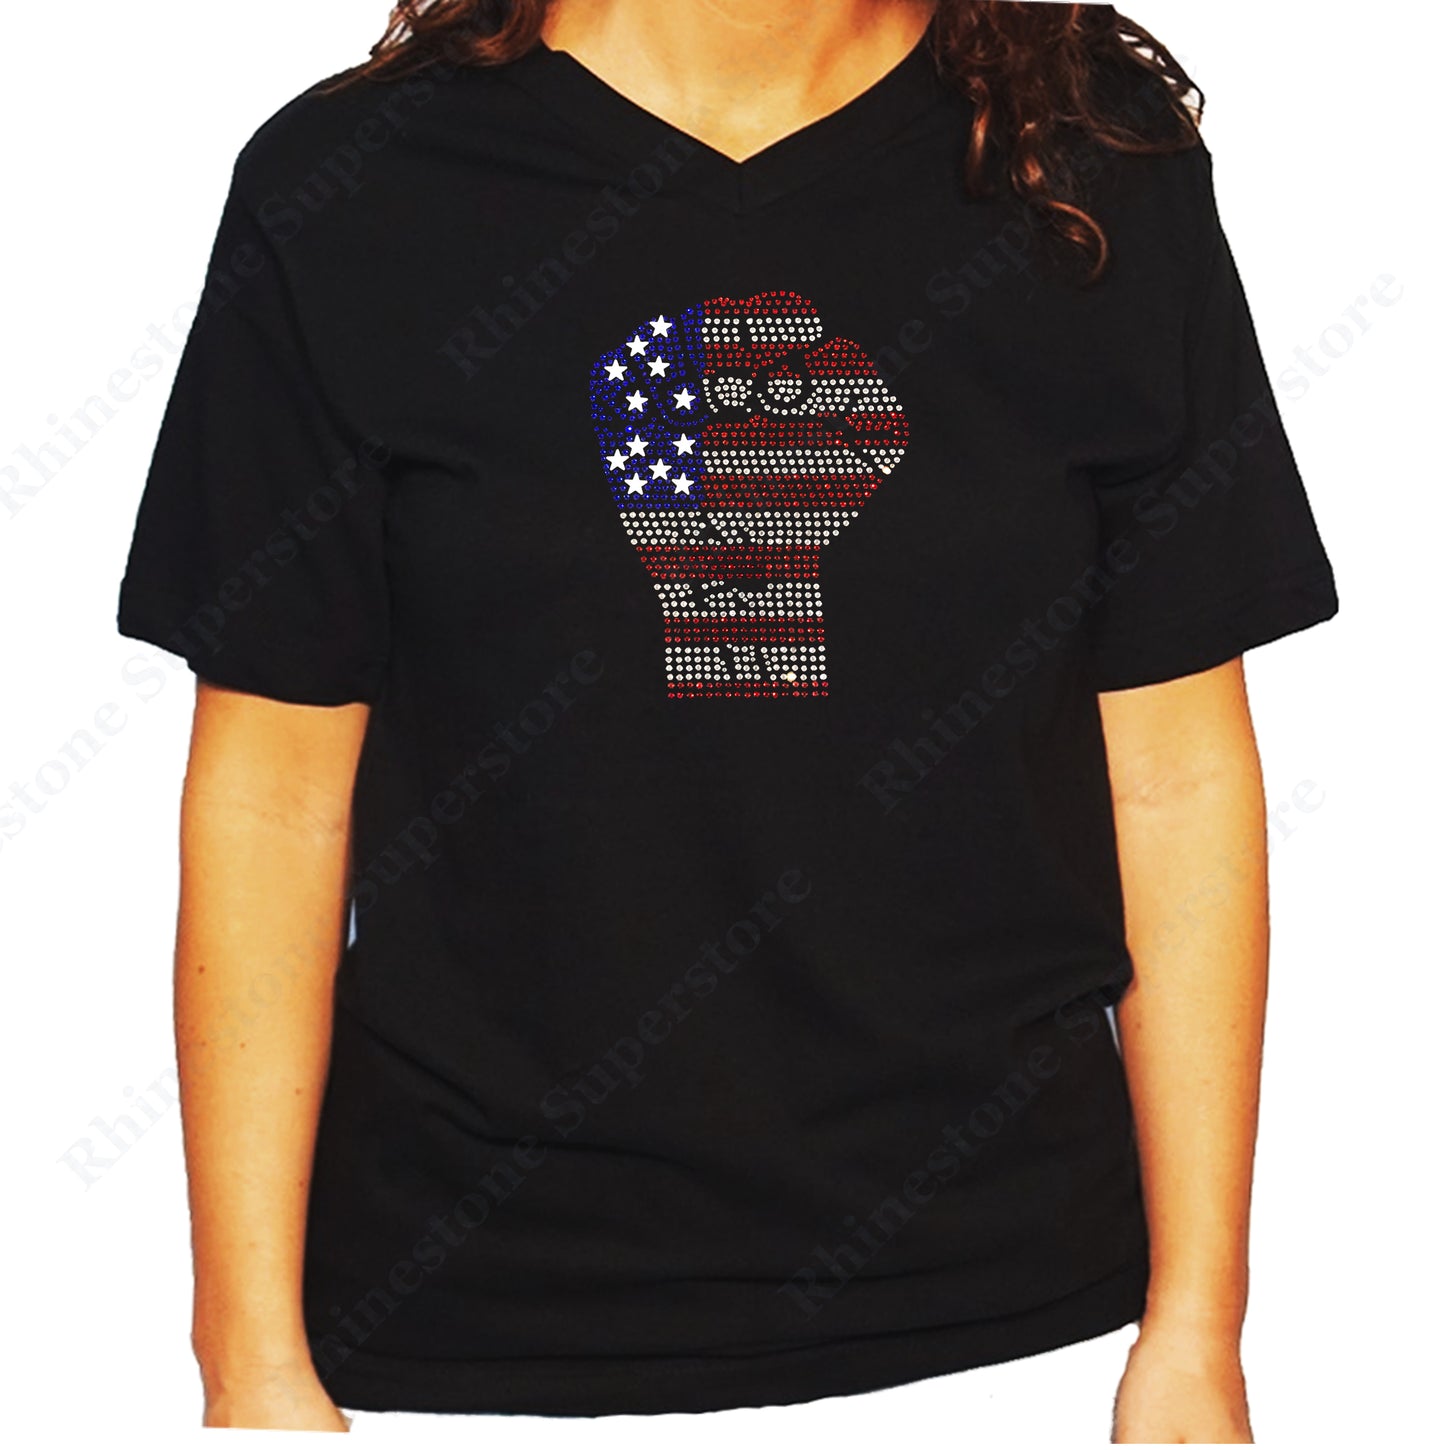 Women's / Unisex T-Shirt with 4th of July Fist in Rhinestones